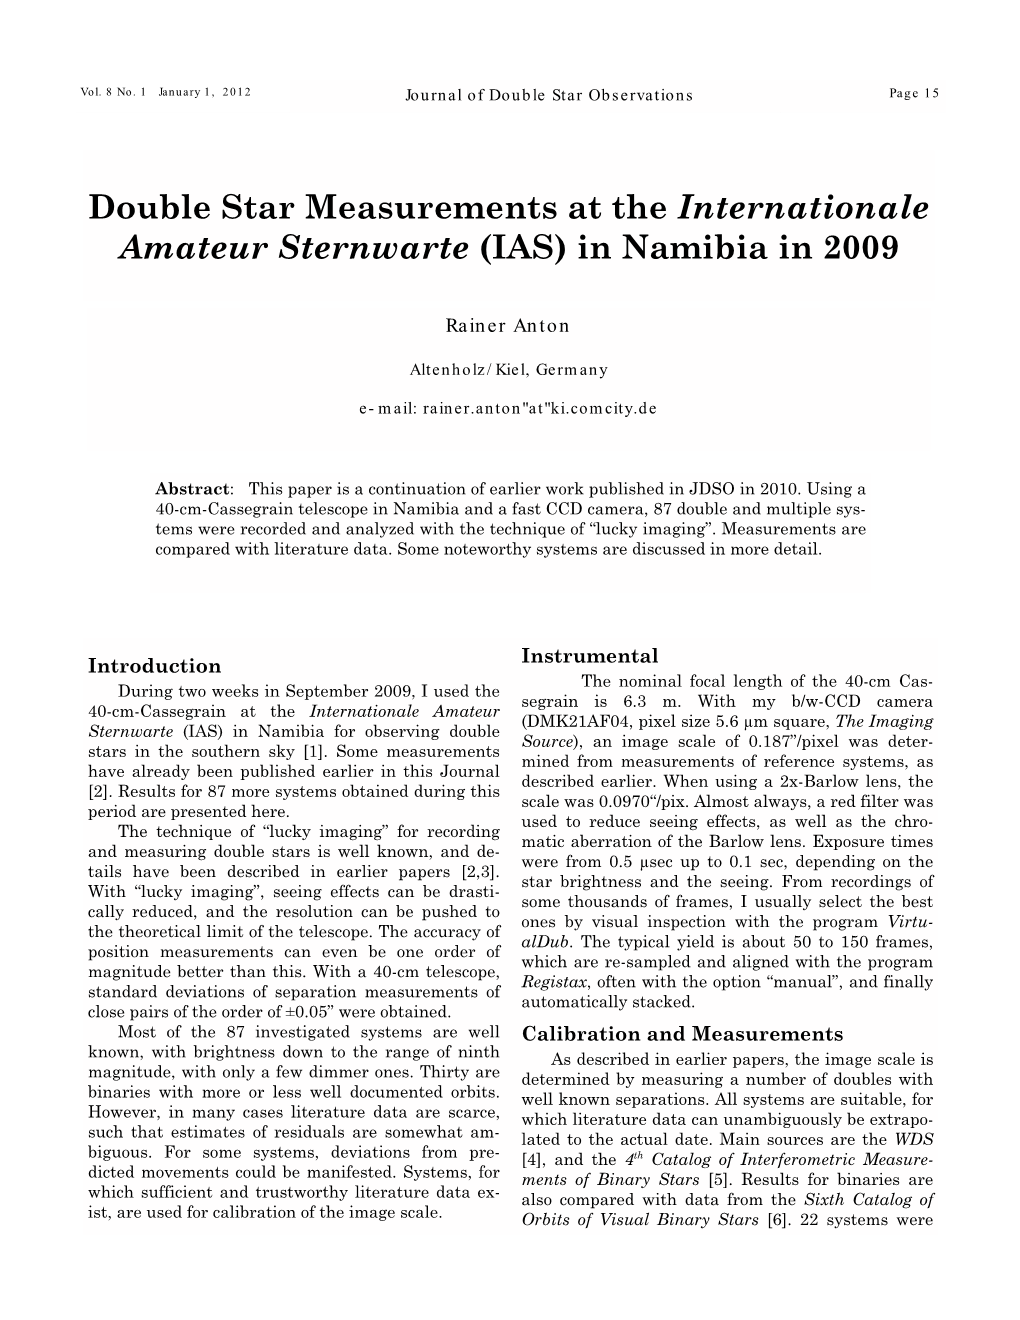 Double Star Measurements at the Internationale Amateur Sternwarte (IAS) in Namibia in 2009